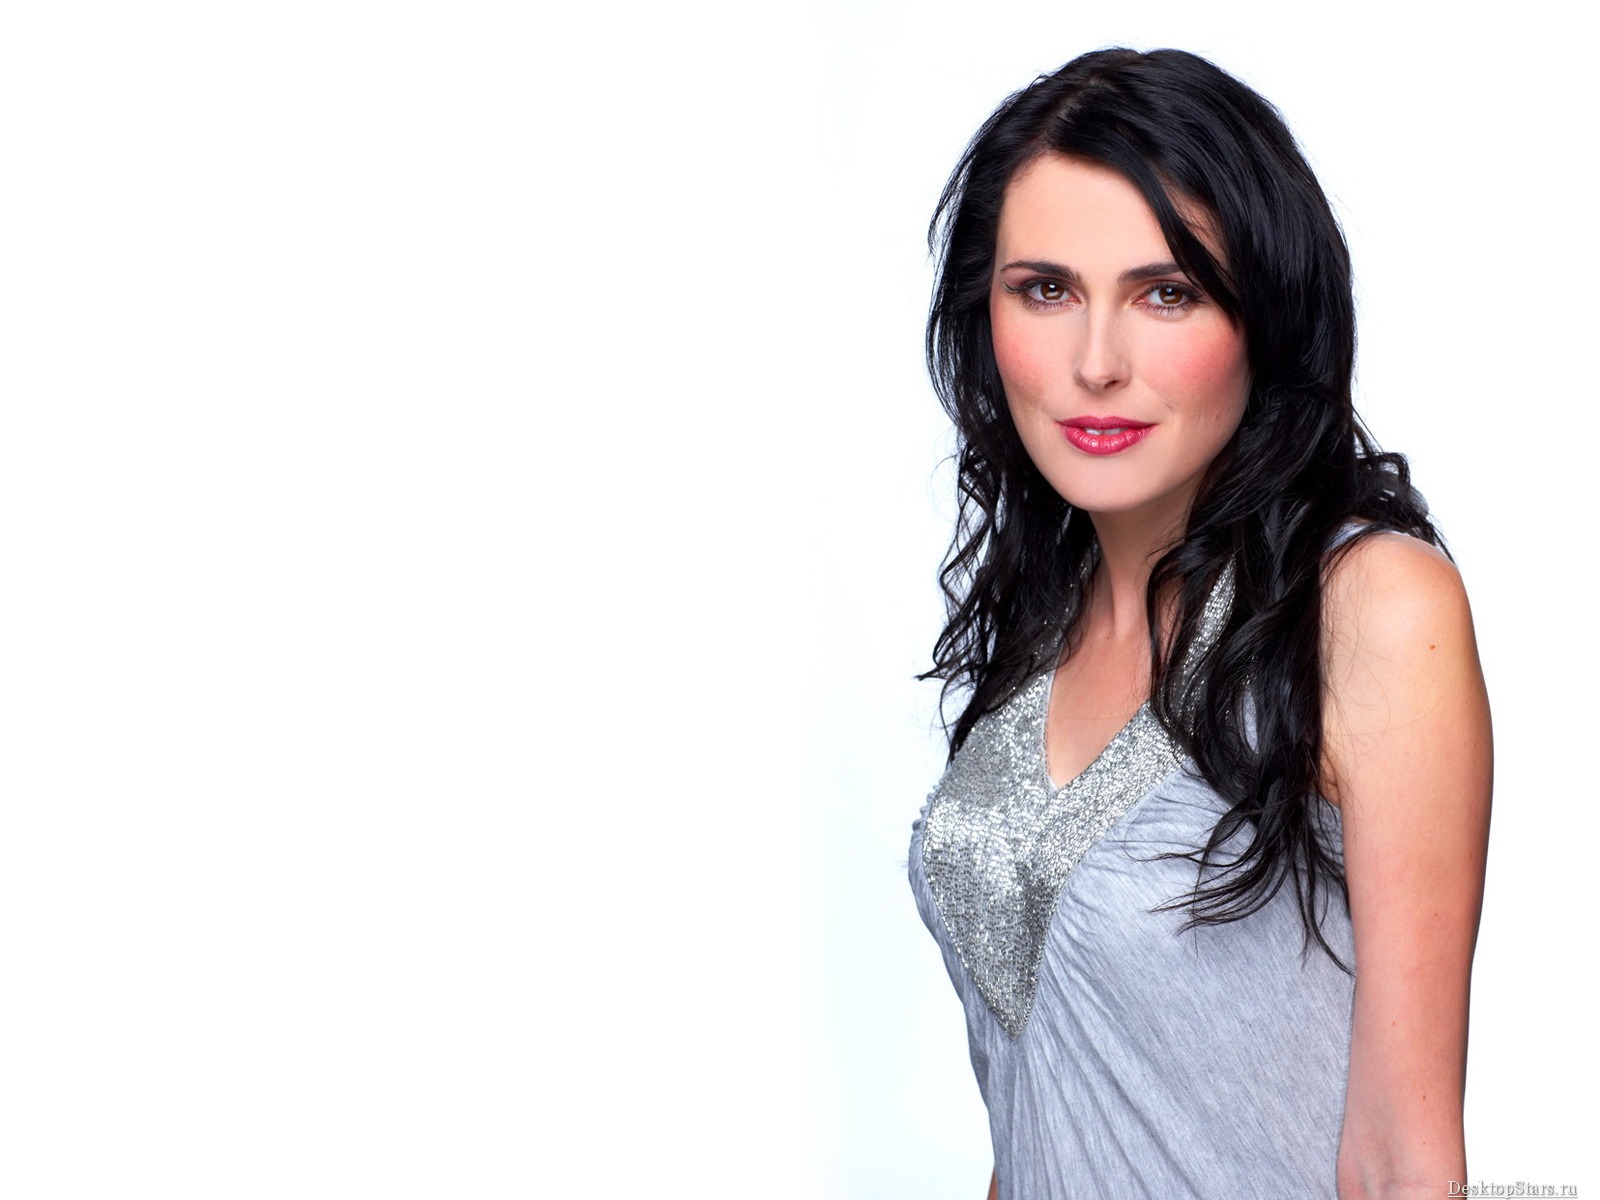 Sharon den Adel #007 - 1600x1200 Wallpapers Pictures Photos Images